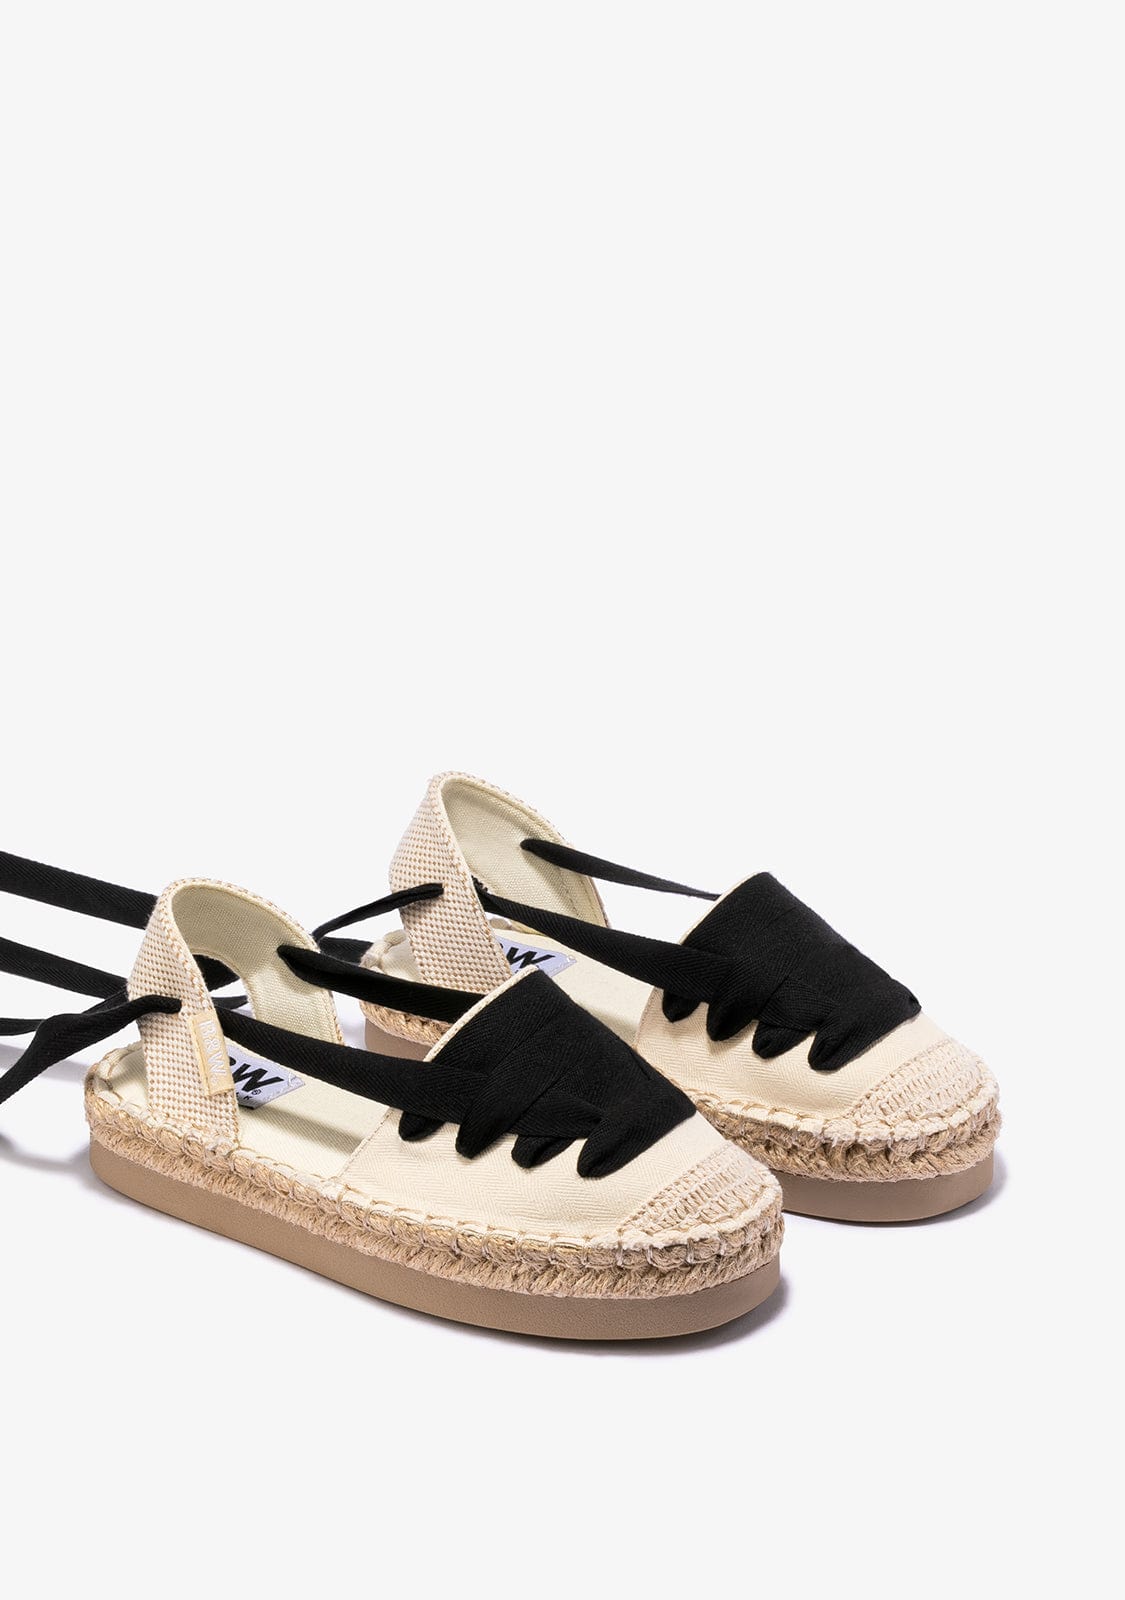 B&W JUNIOR Shoes Girl's Beige With Bow Espadrilles Canvas B&W